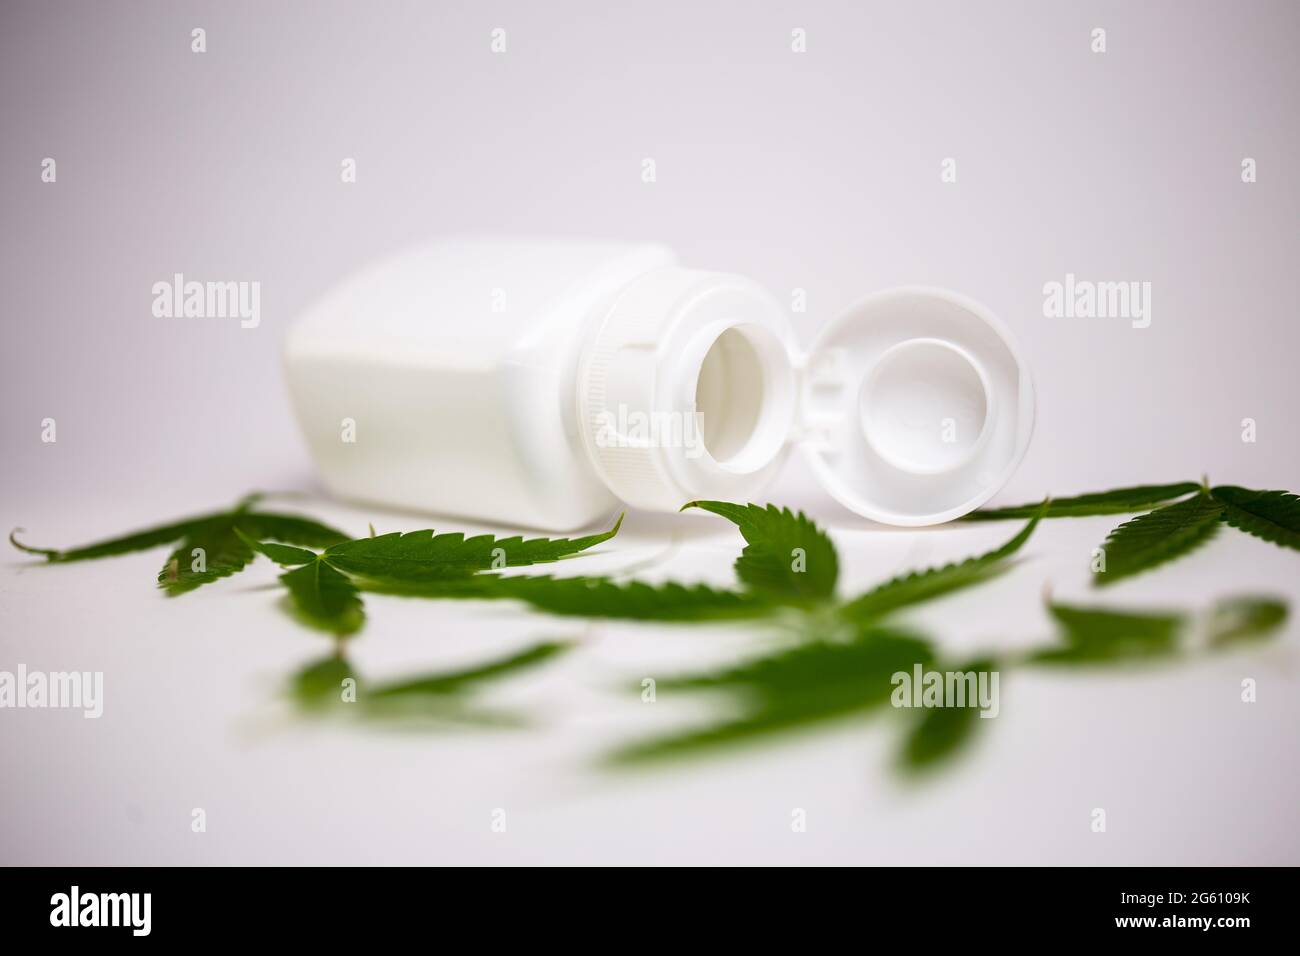 white jar with cannabis leaves on a white background. Stock Photo